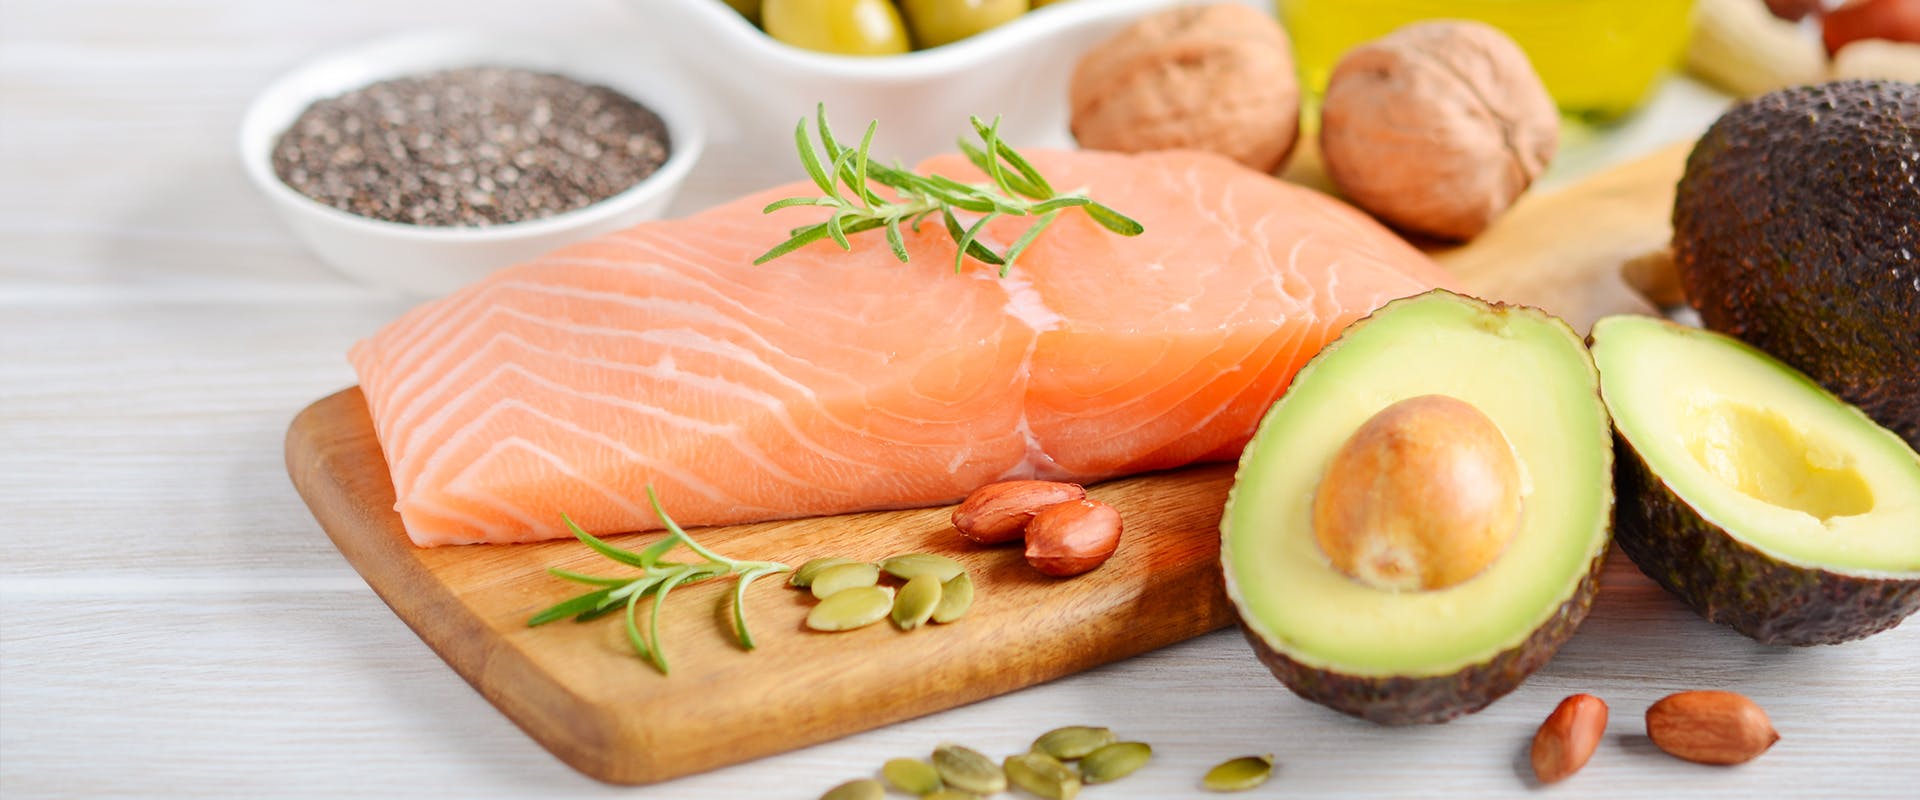 Food with omega3 acids - salmon, avokado, nuts - to superpower your brain